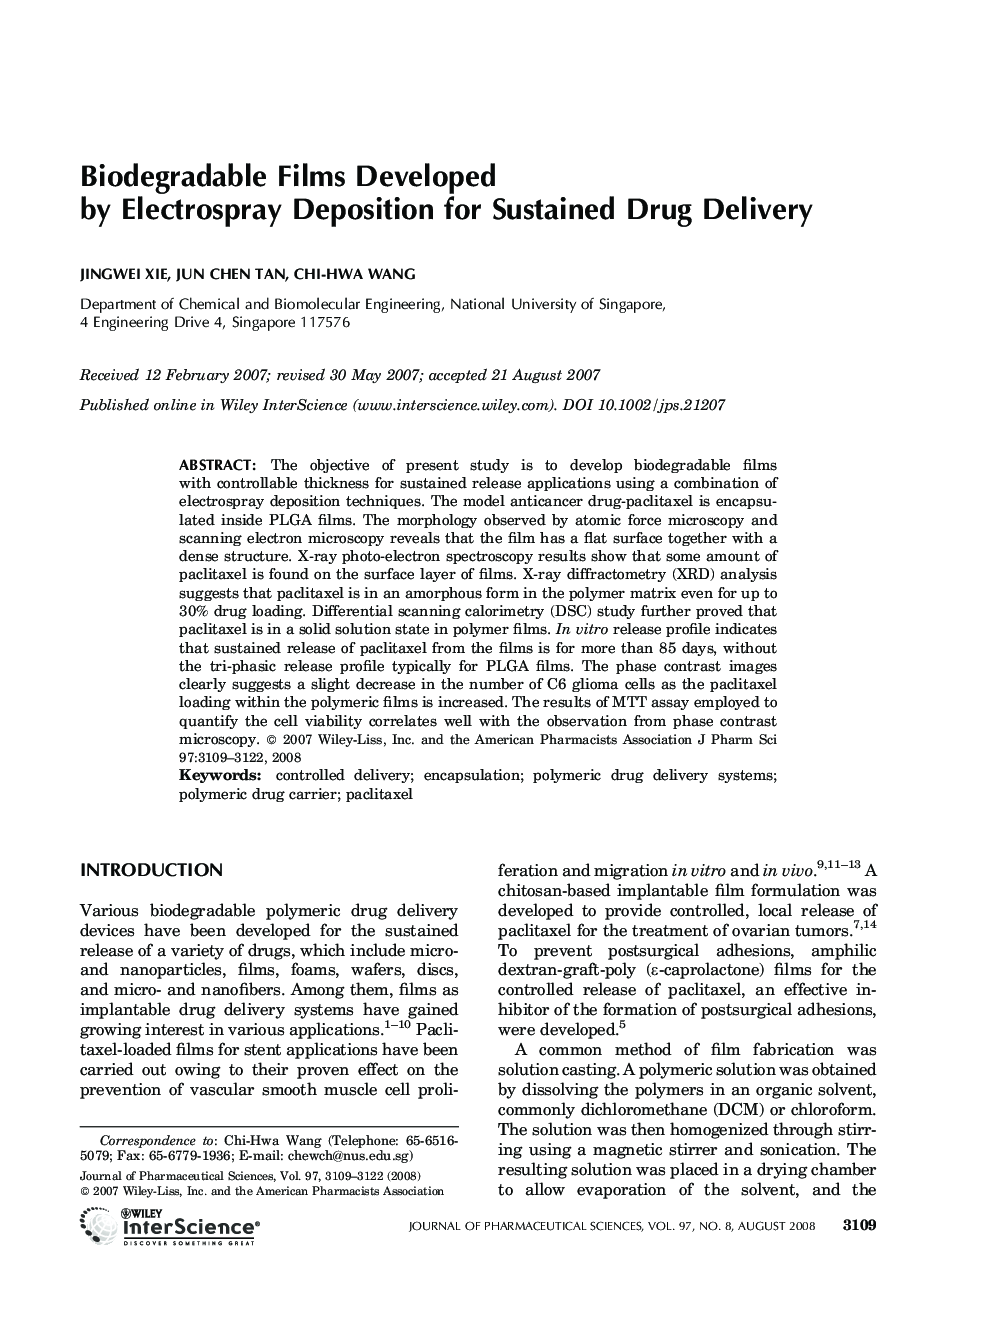 Biodegradable Films Developed by Electrospray Deposition for Sustained Drug Delivery